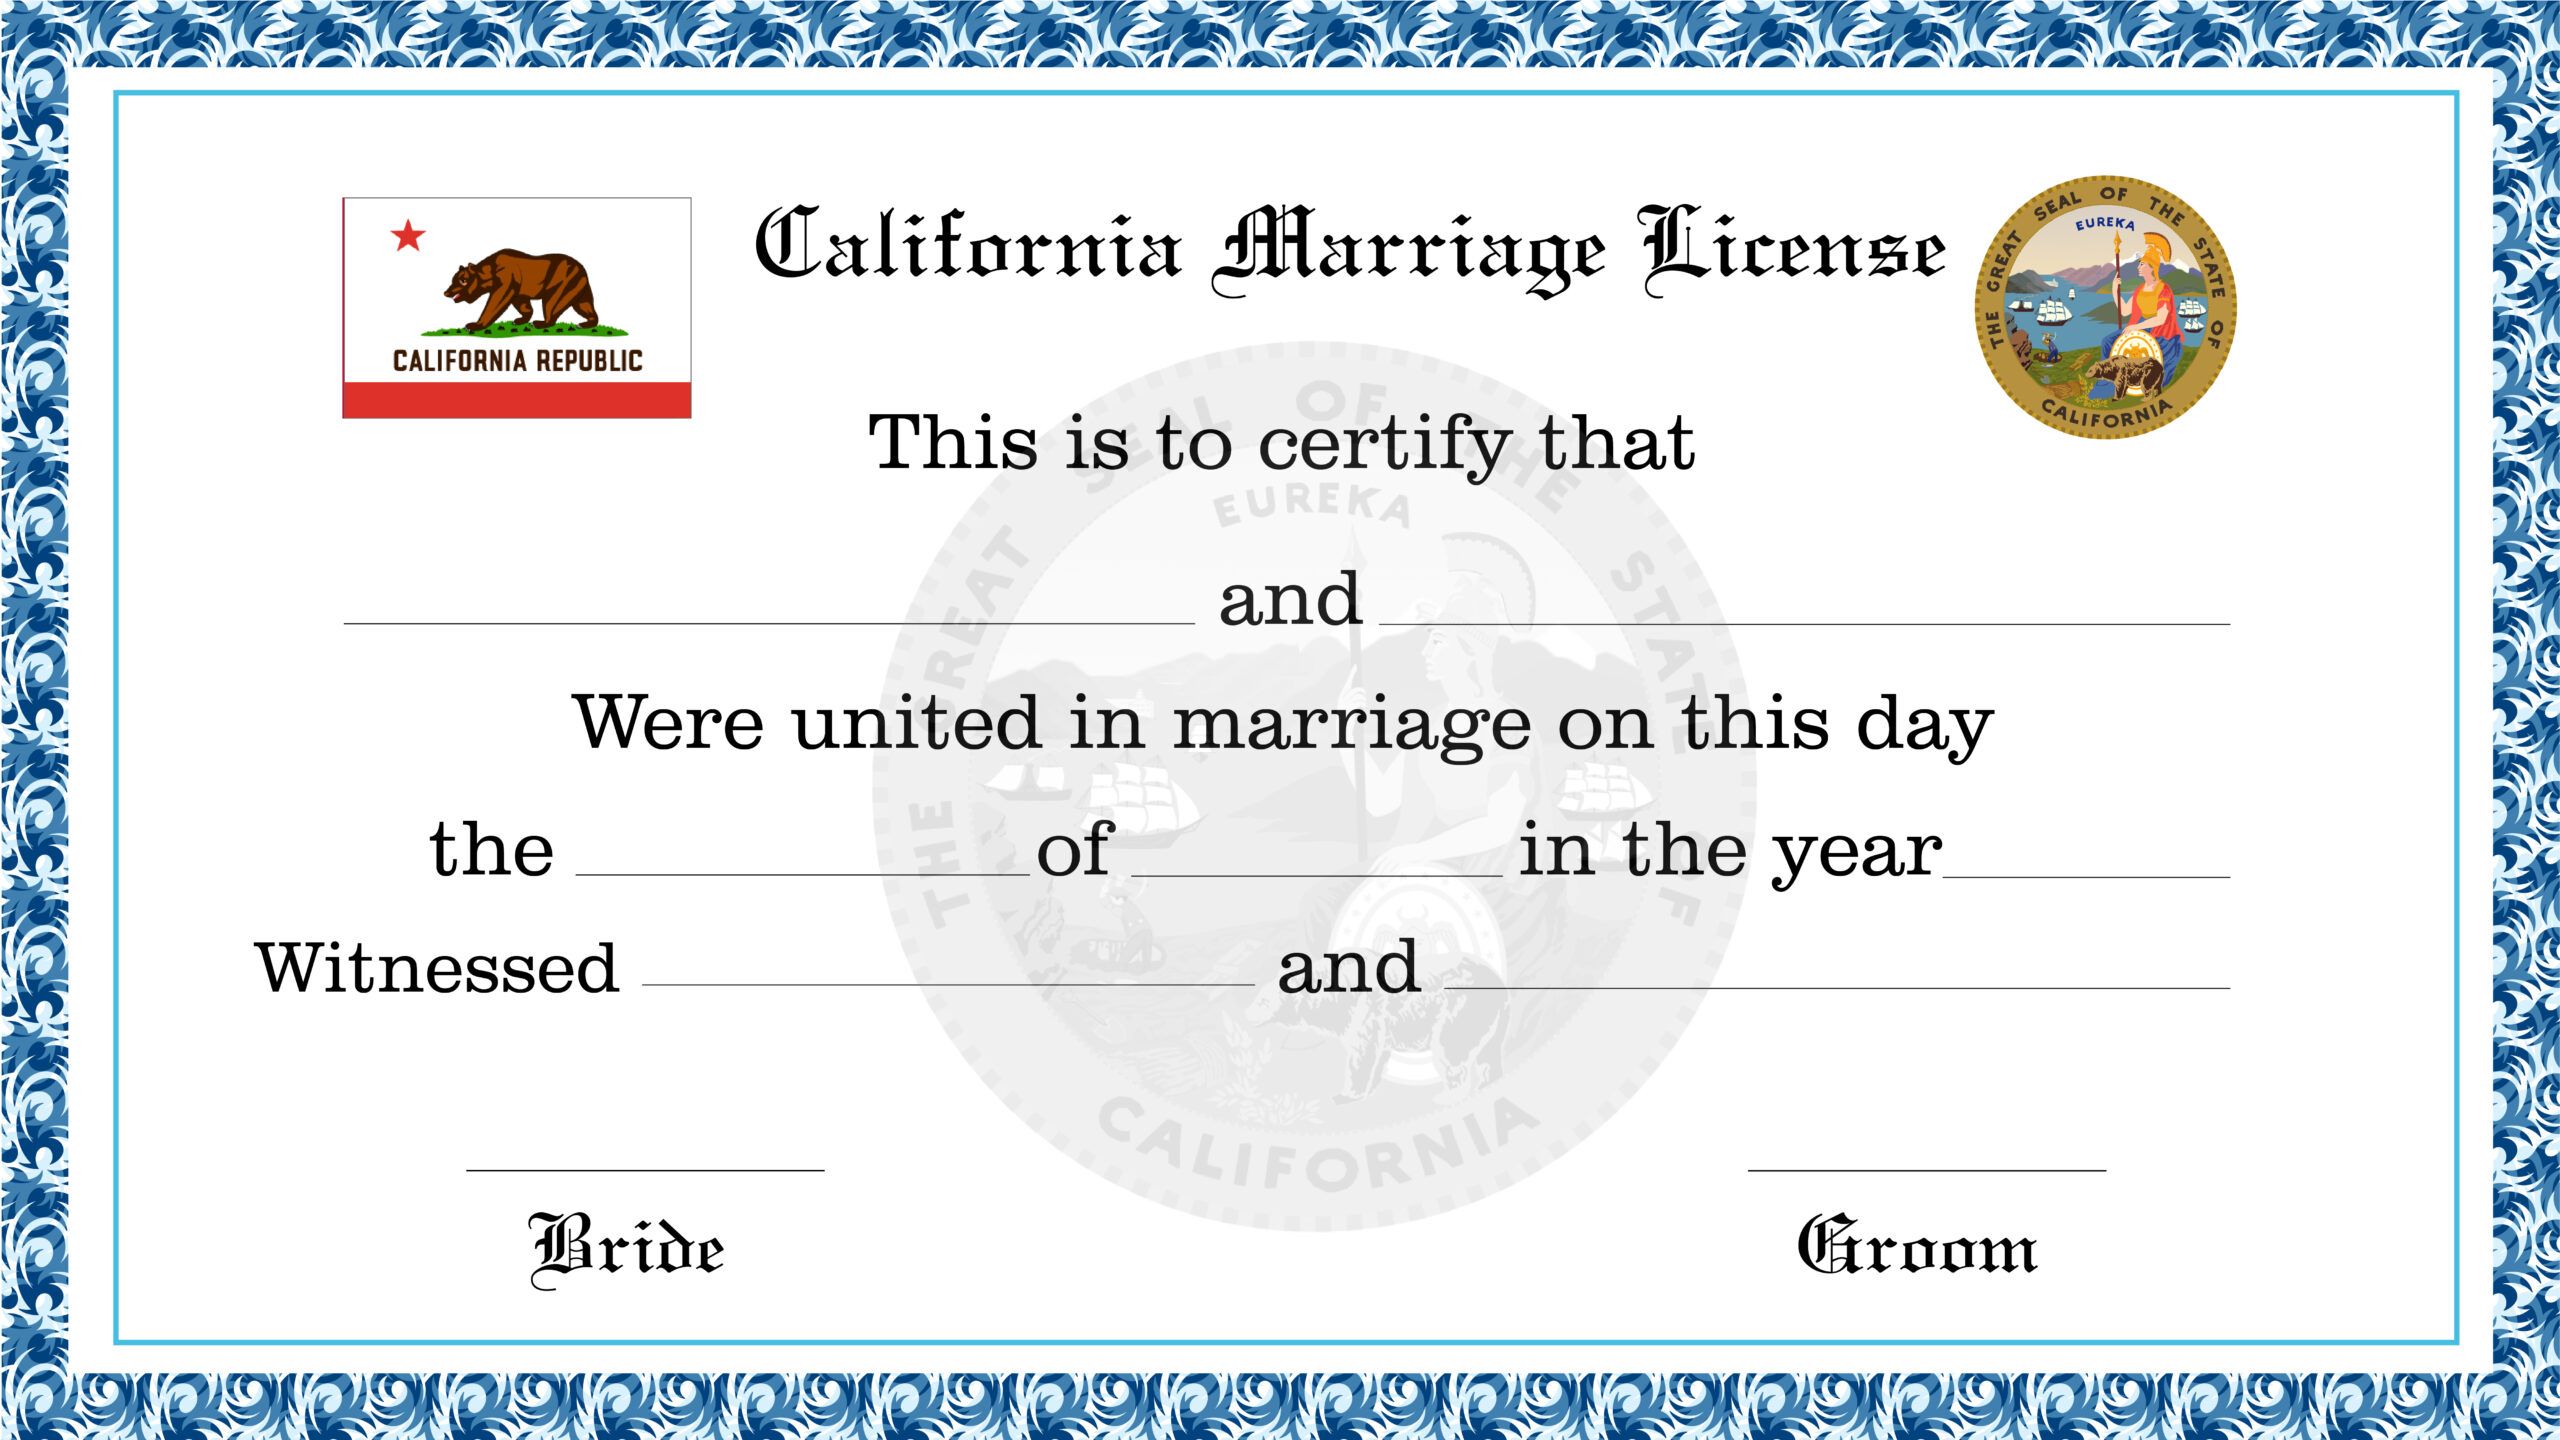 legal age for marriage without consent in california